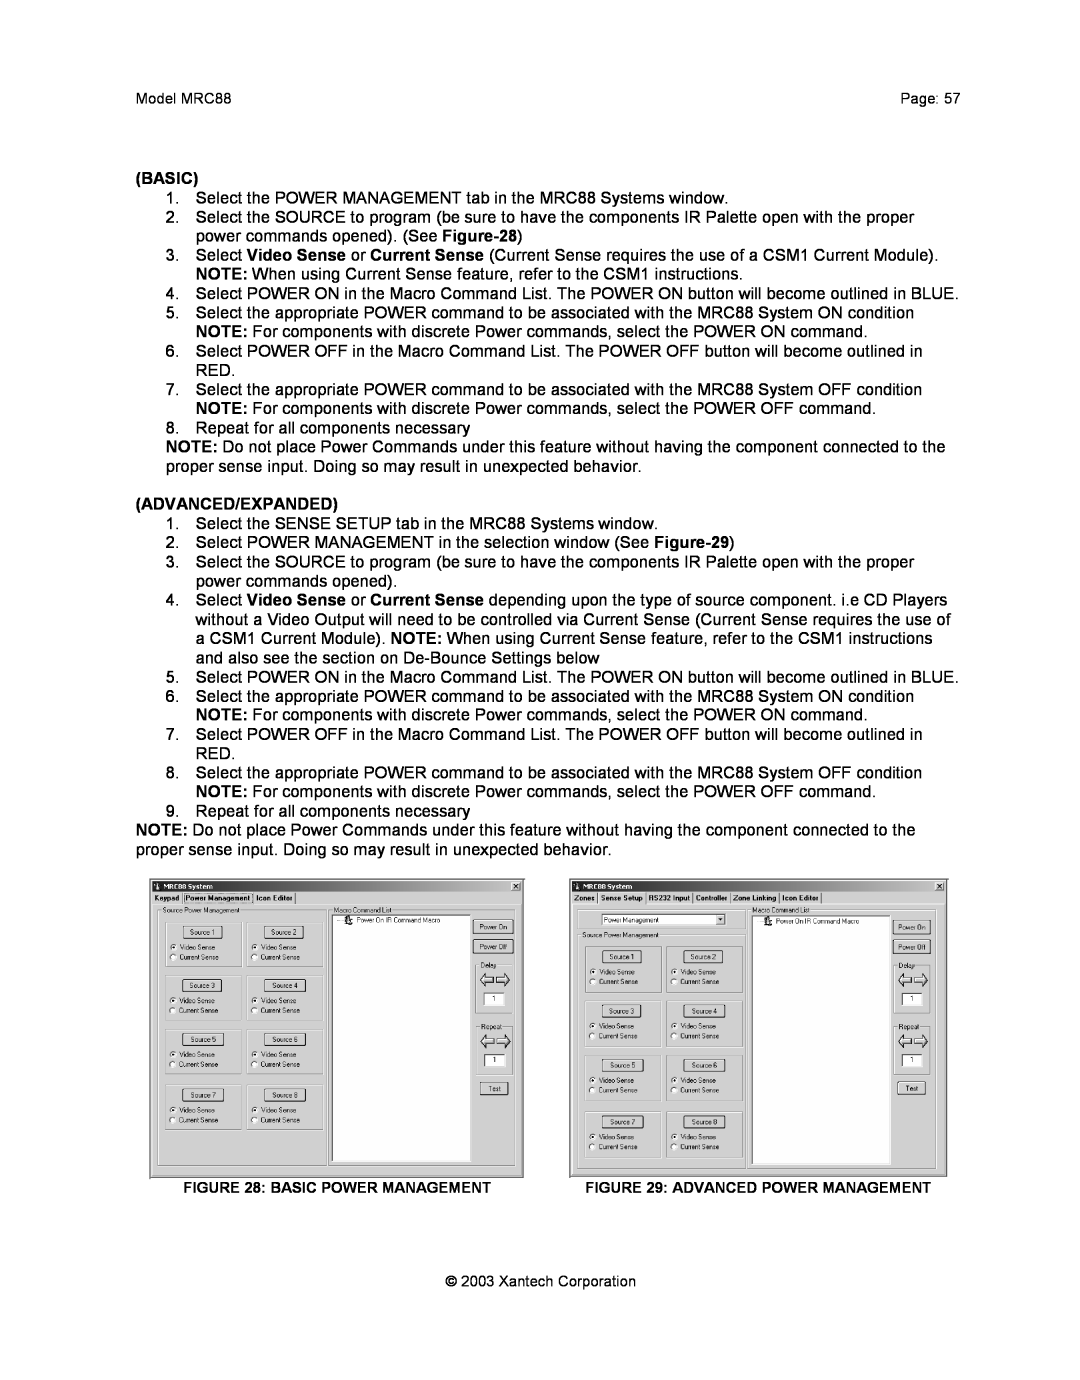 Xantech mrc88 installation instructions Basic, Repeat for all components necessary, Advanced/Expanded 